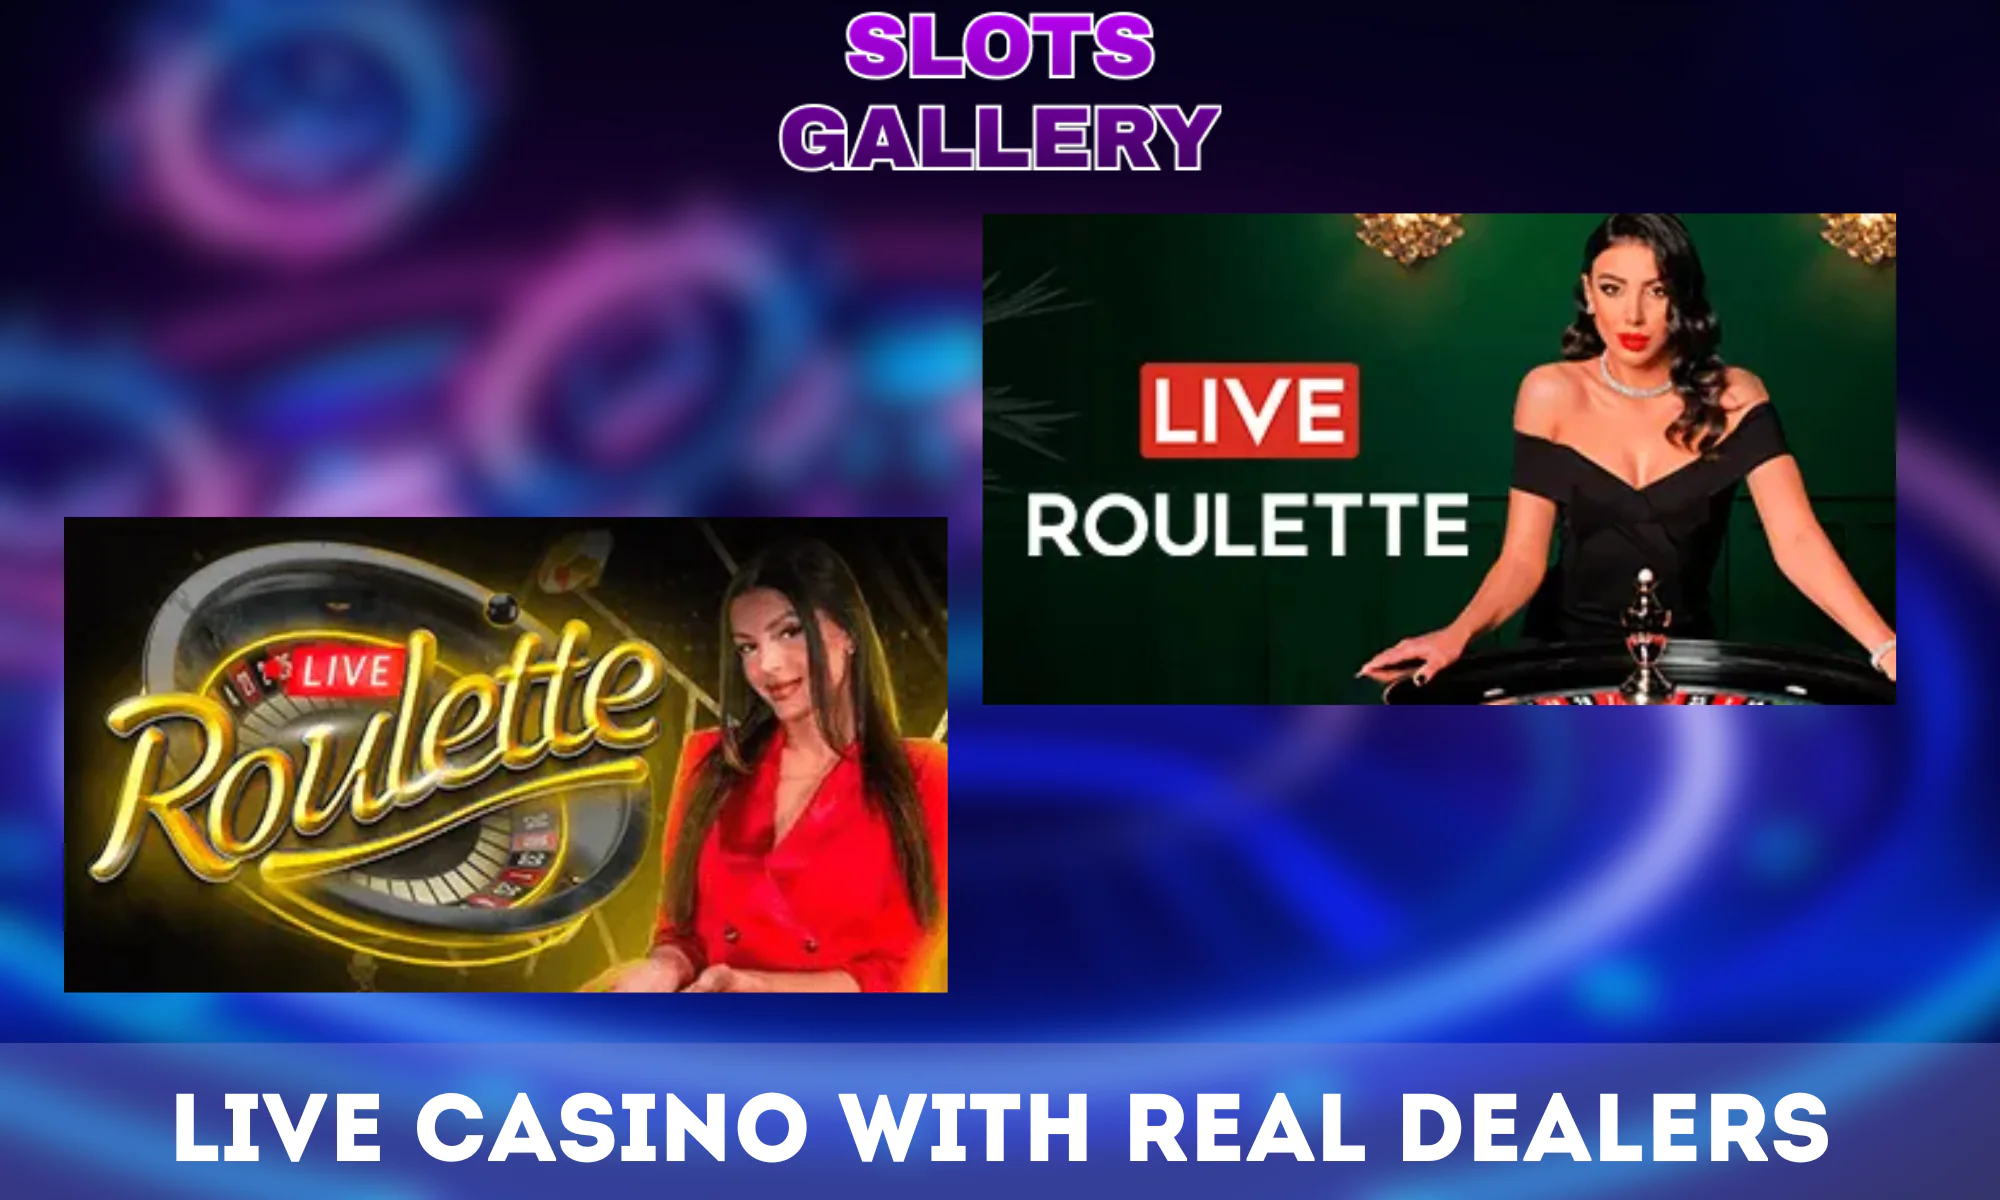 Slots Gallery has more than 600 live games